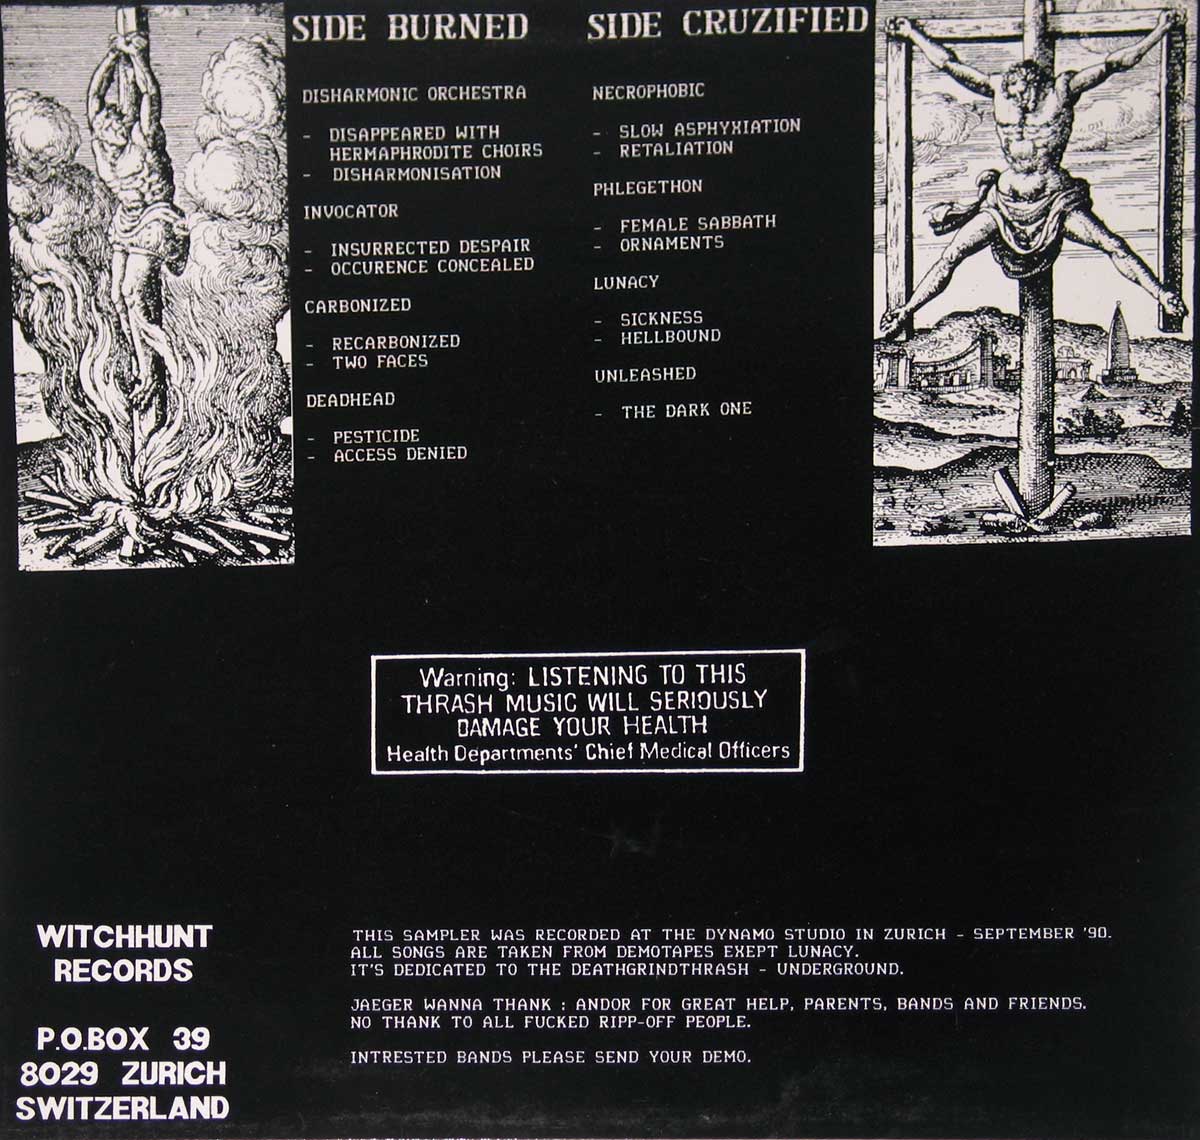 Photo of the album back cover and the titles: "Burned" and "Cruzified"  